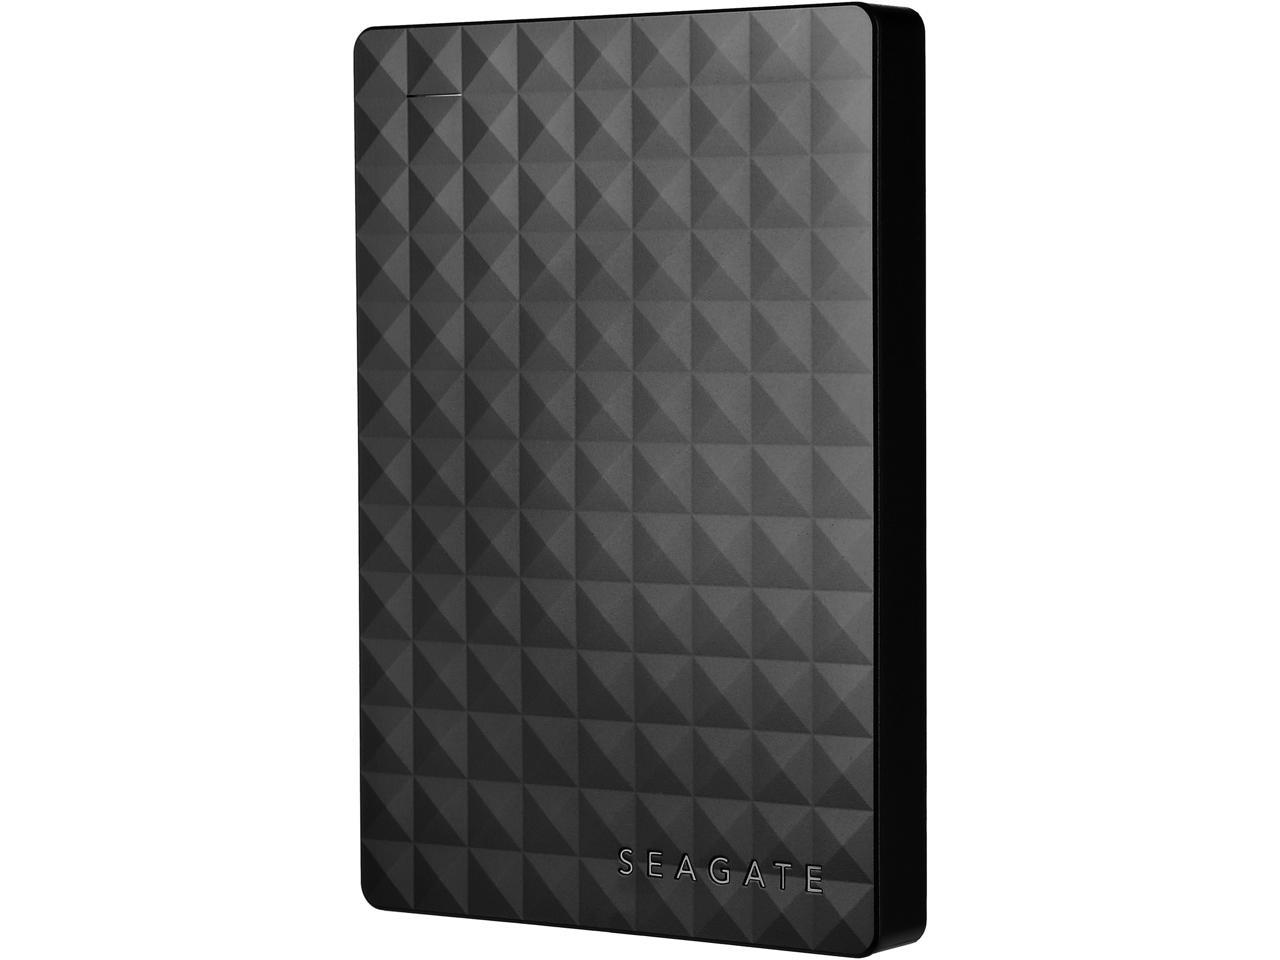 Seagate Portable Hard Drive 500Gb Hdd - External Expansion For Pc Windows Ps4 & Xbox - Usb 2.0 & 3.0 Black (Stea500400)